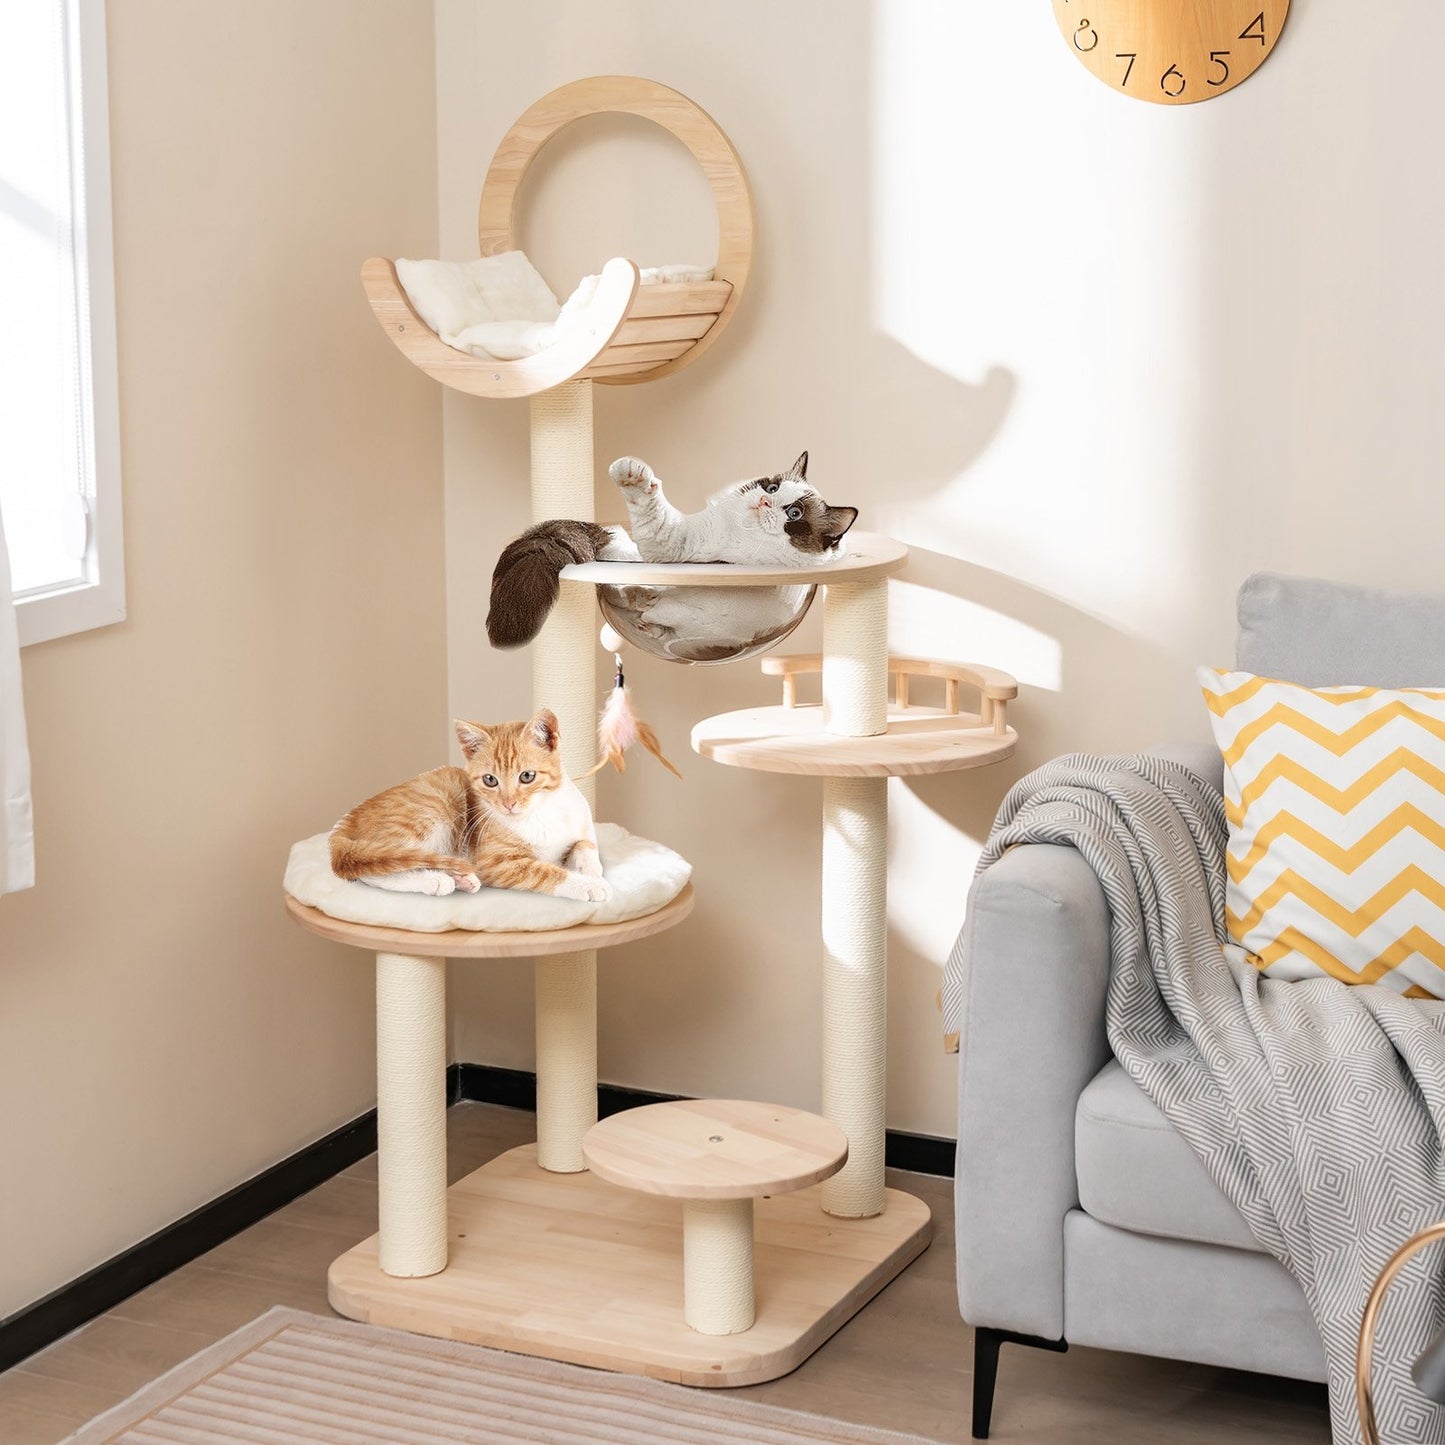 4-in-1 Large Wooden Cat Tower with Space Capsule Nest for Indoor Cats, Beige